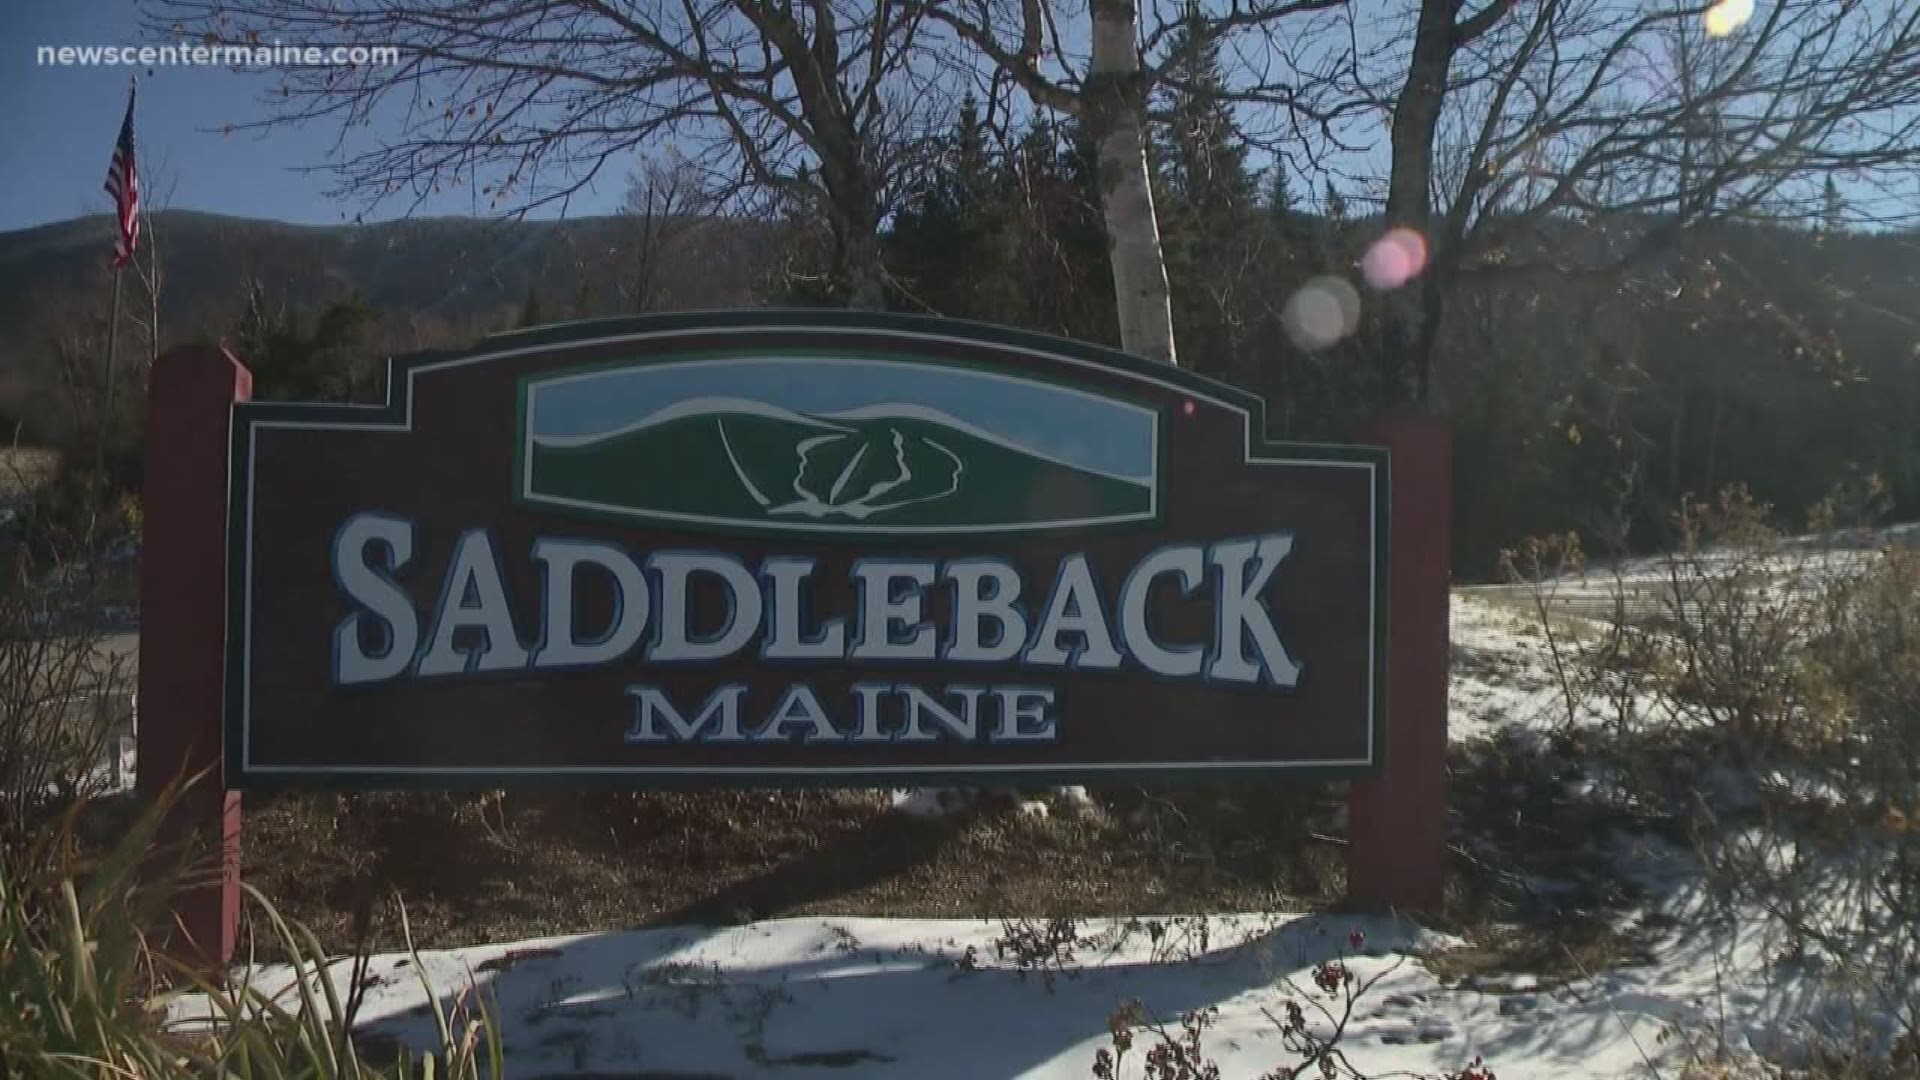 A Boston investment group offers to buy Saddleback Mountain.